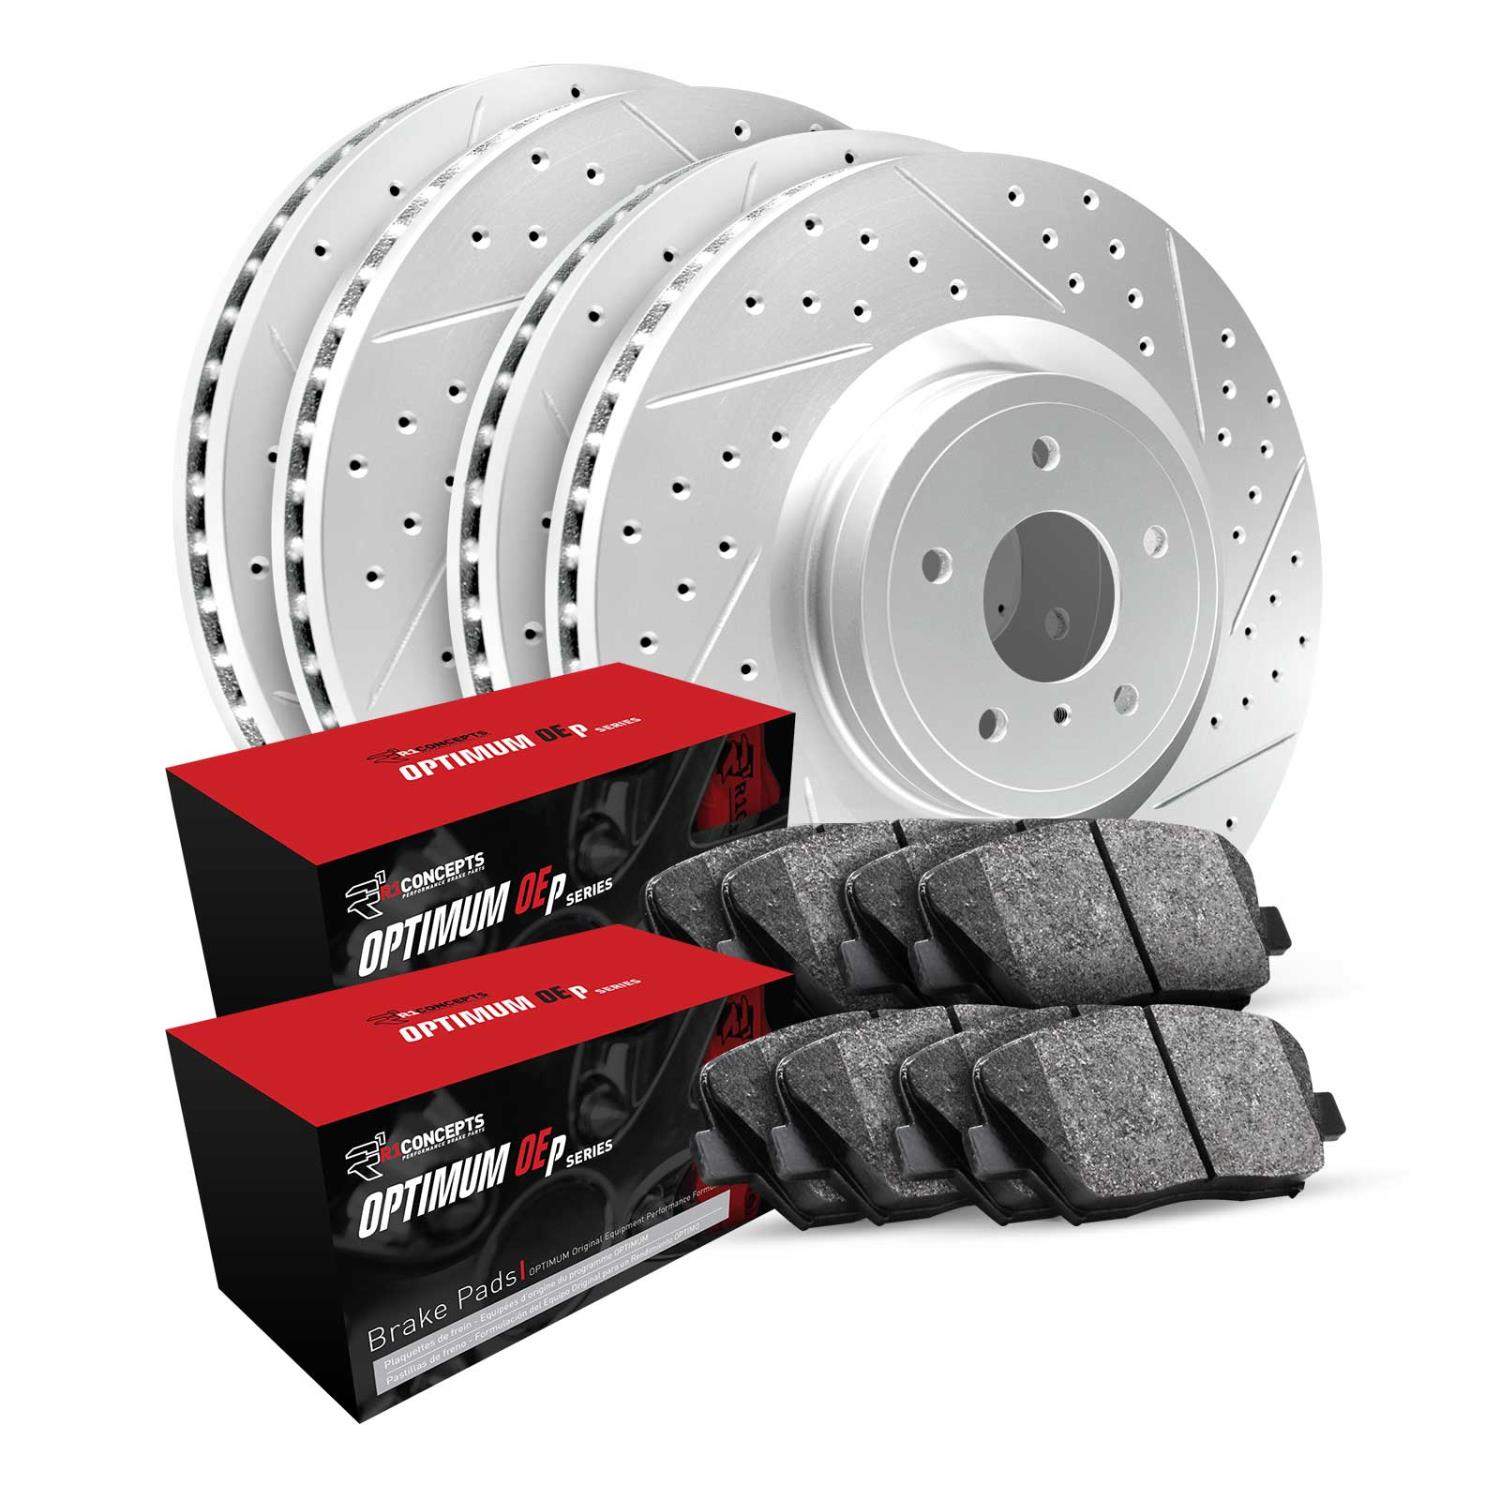 GEO-Carbon Brake Rotor Set w/Optimum OE Pads, 2015-2019 Fits Multiple Makes/Models, Position: Front & Rear